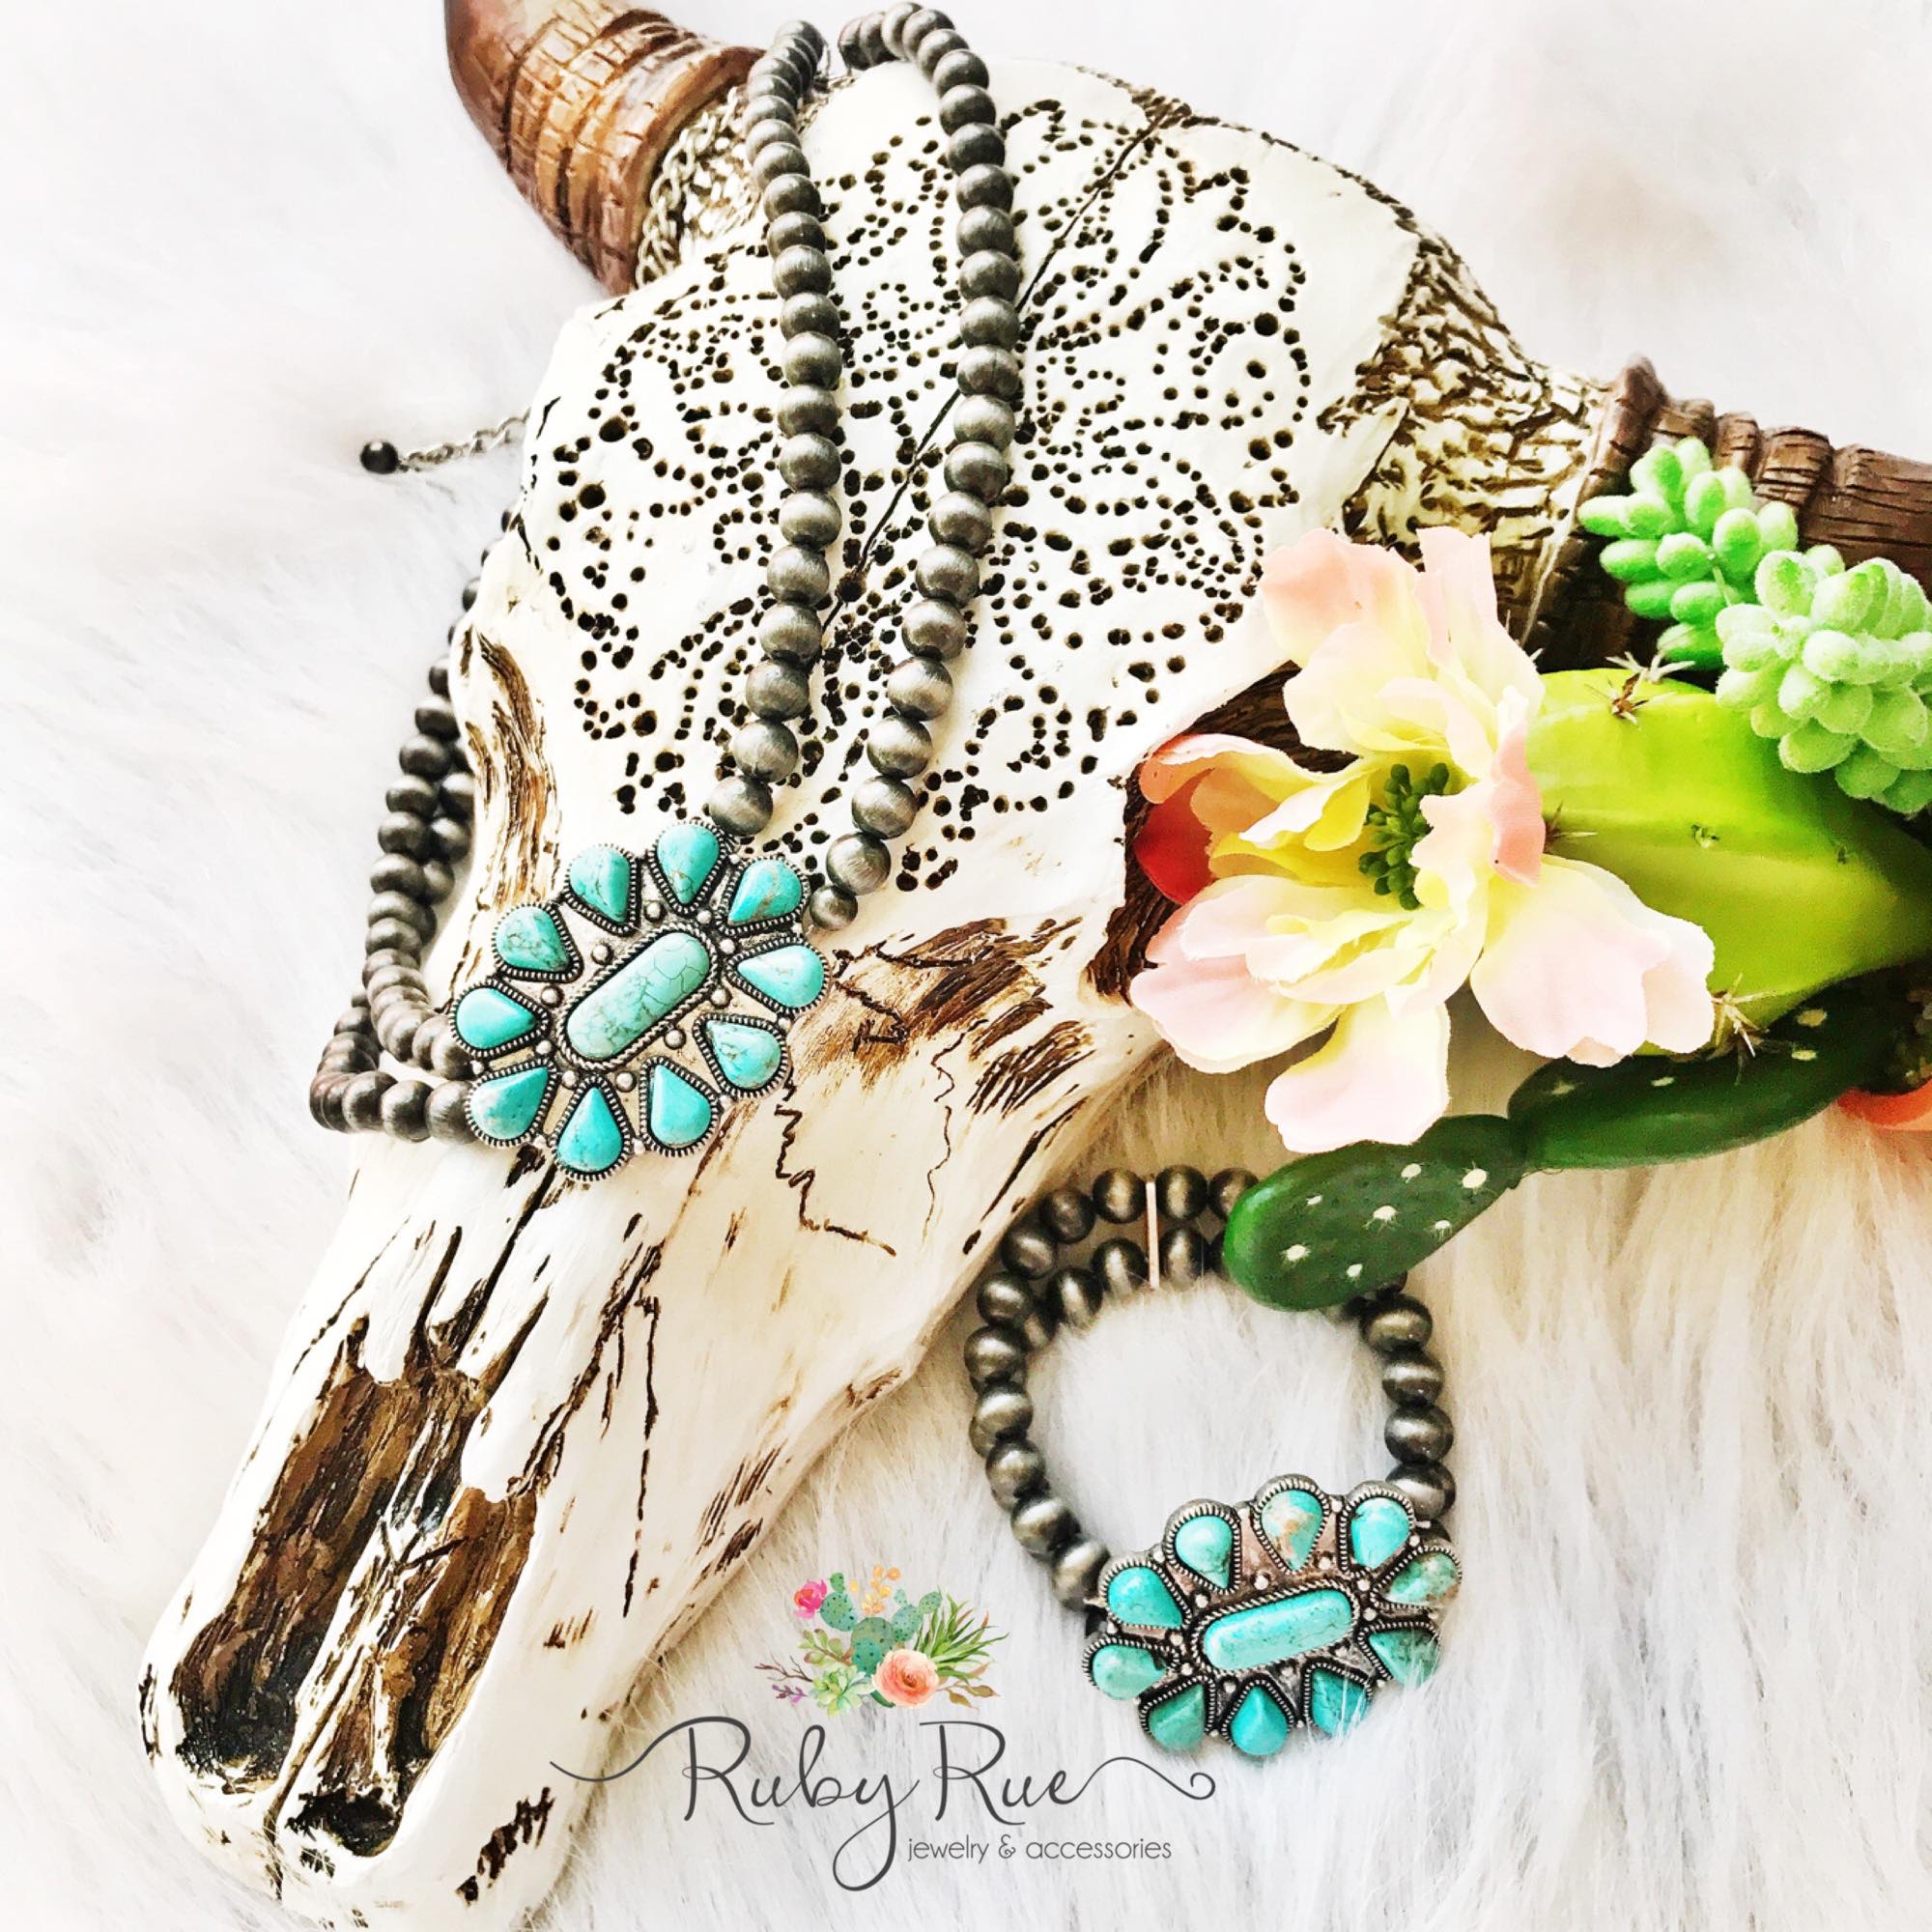 The Laynee Turquoise Bracelet - Ruby Rue Jewelry & Accessories